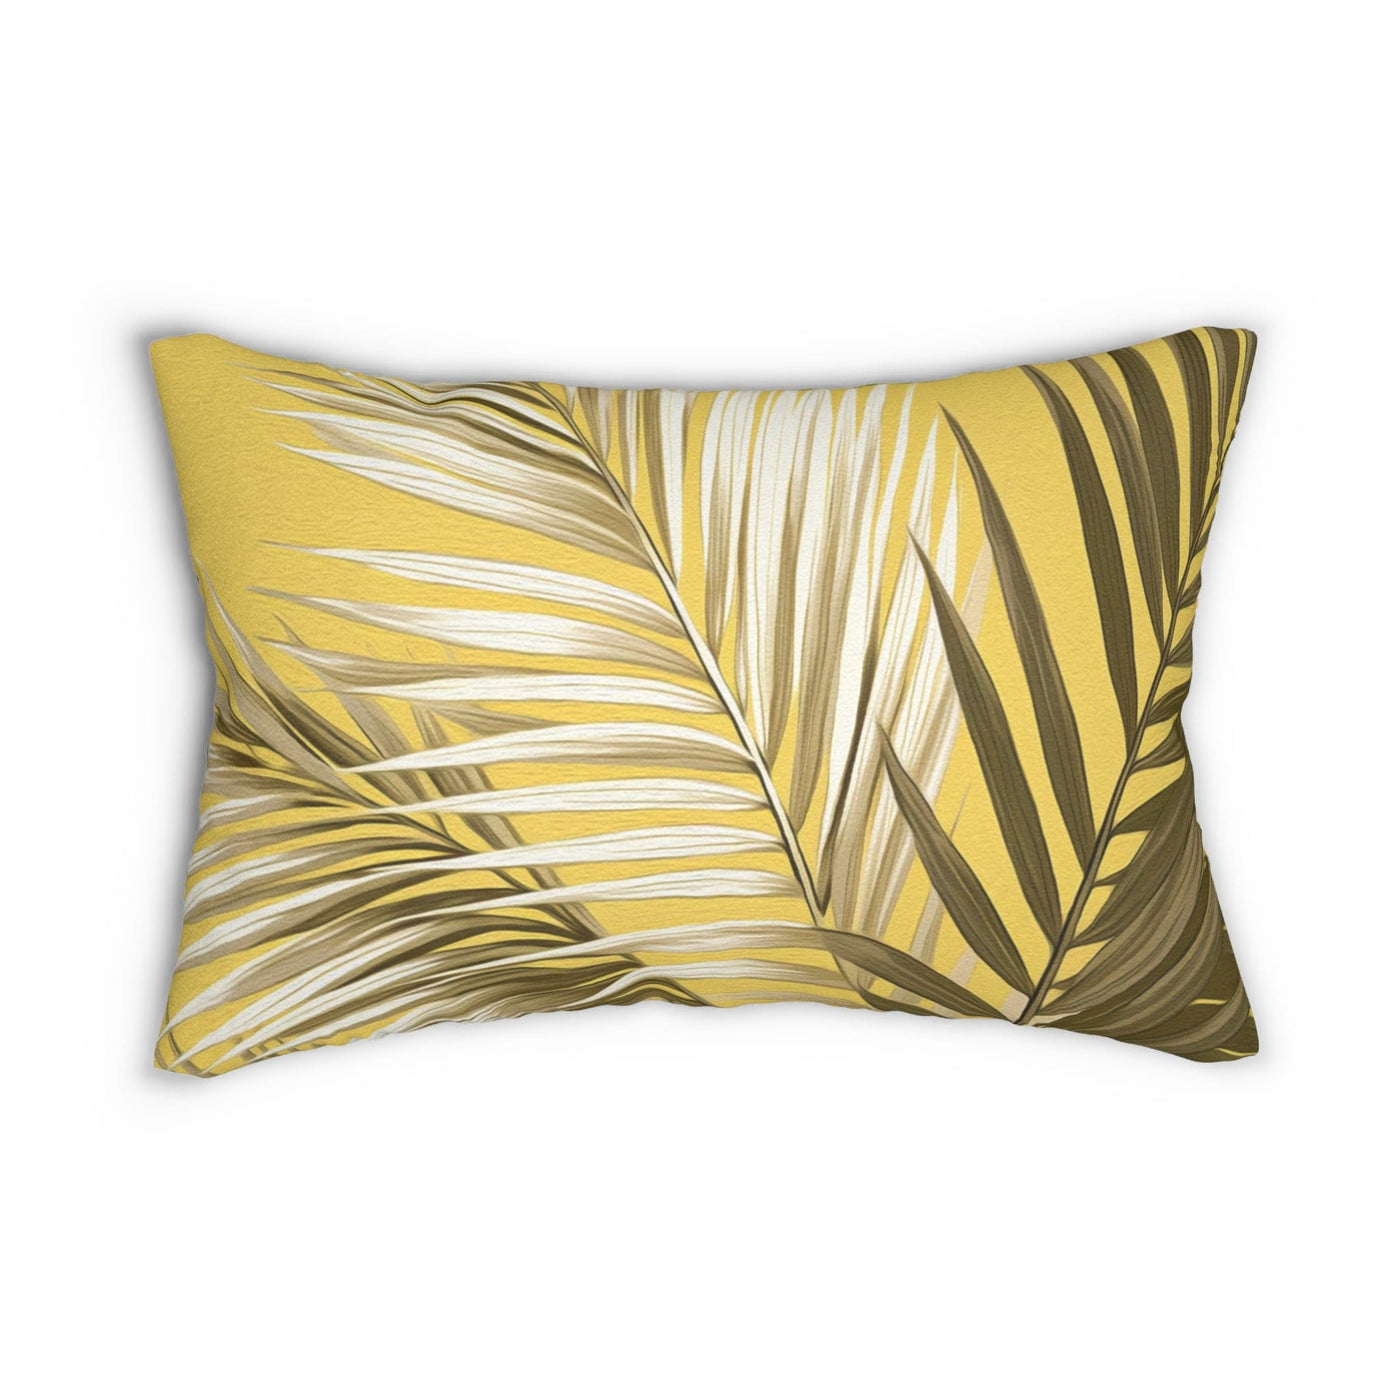 Decorative Lumbar Throw Pillow - Palm Tree Brown And White Leaves With Yellow